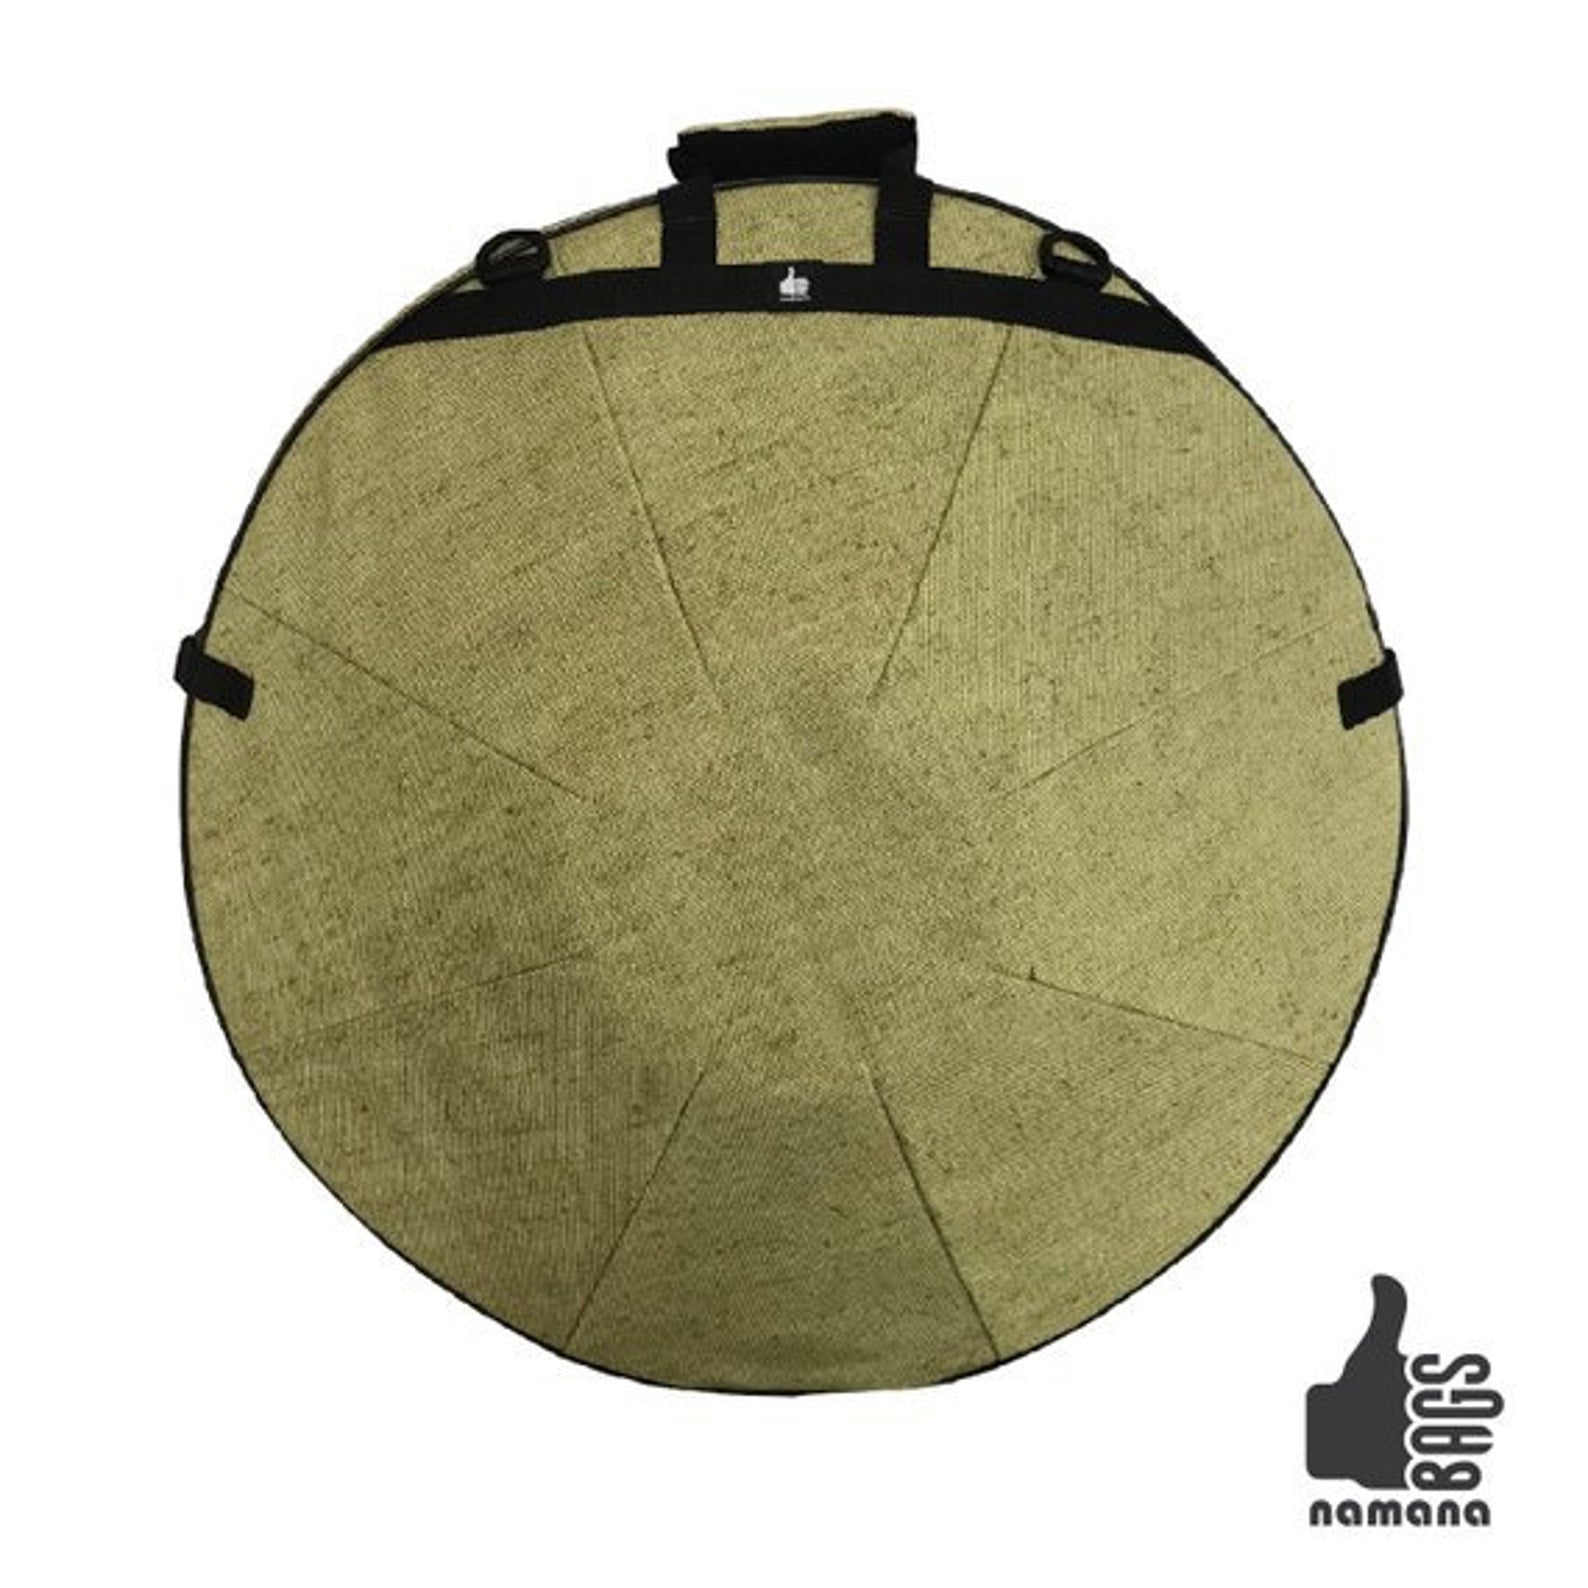 How much does a handpan cost? (Resources & tips)